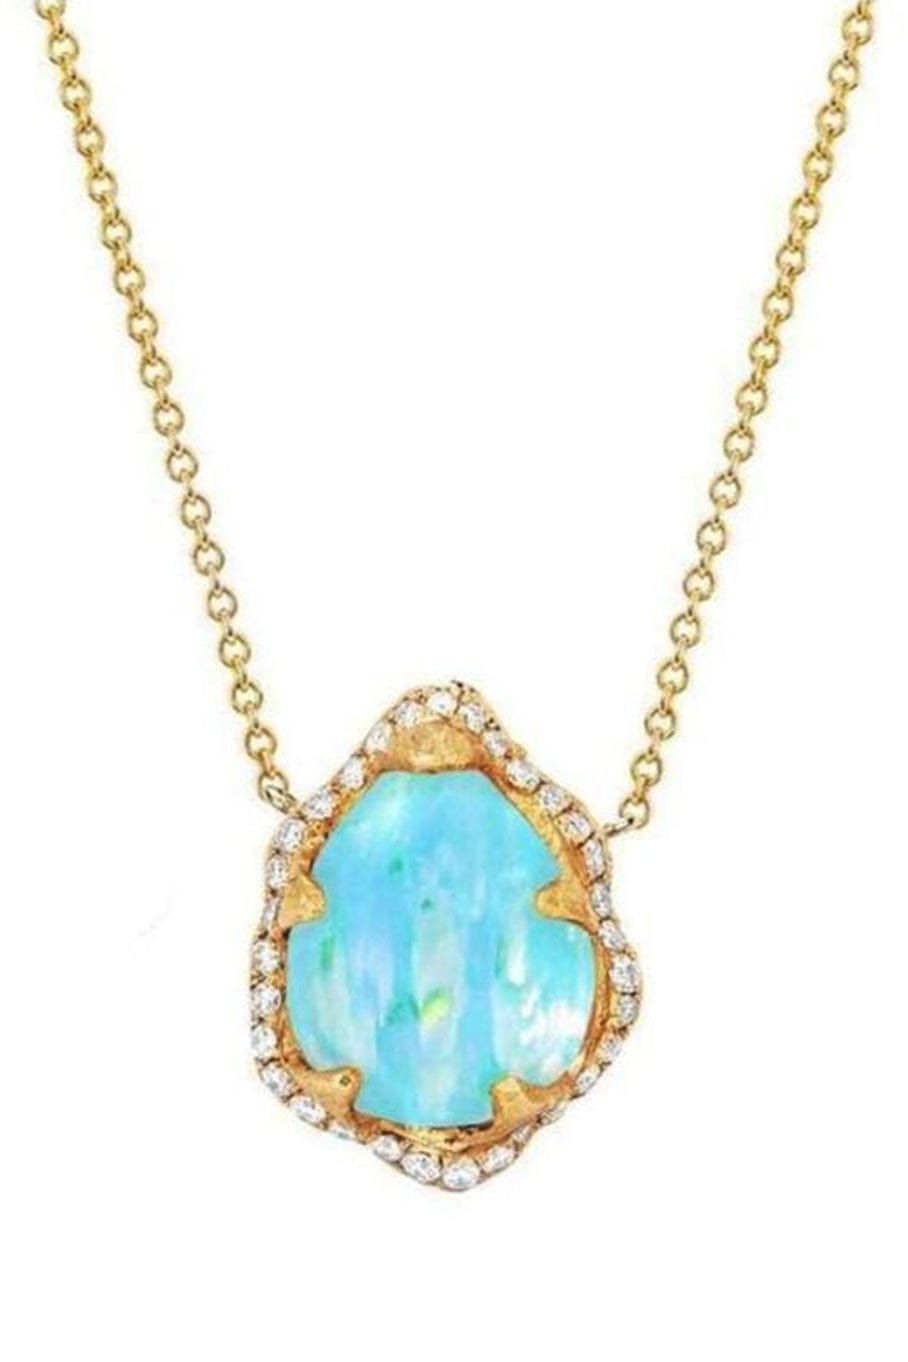 LOGAN HOLLOWELL-Baby Queen Water Drop Blue Opal Necklace with Full Pavé Diamond Halo-